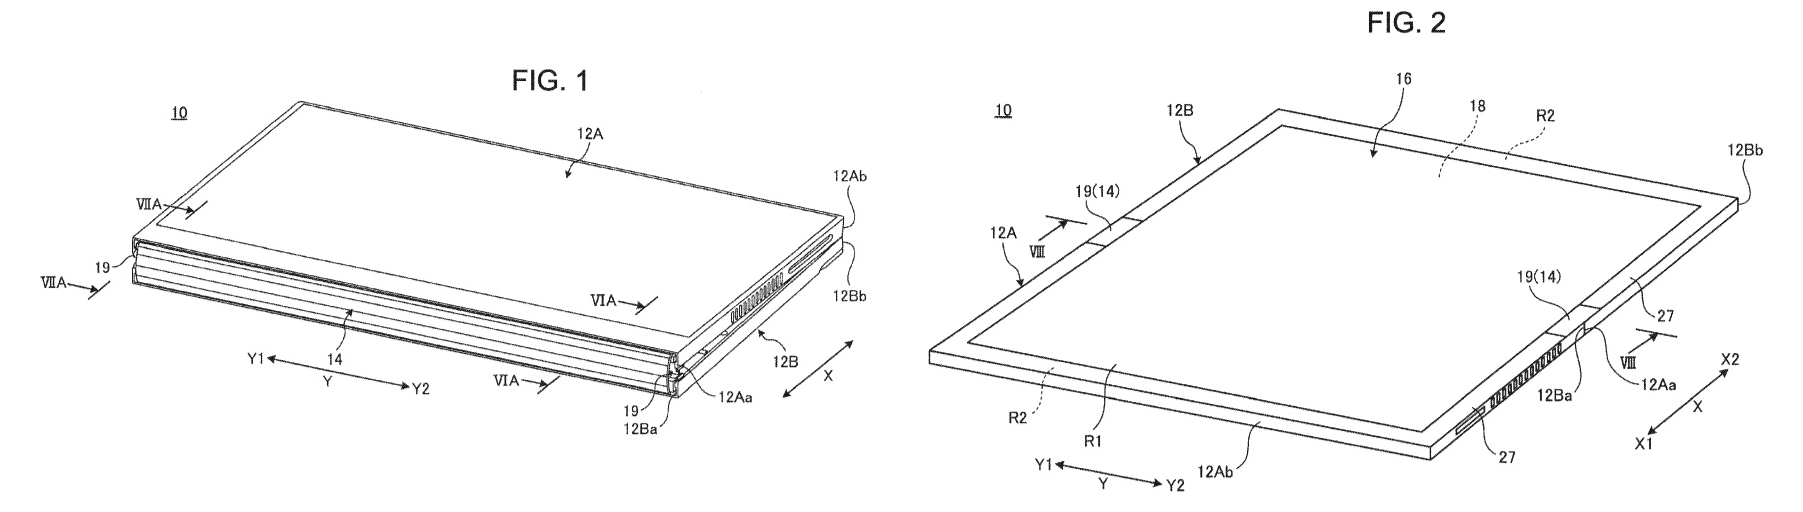 Lenovo to join the foldable tablet fray according to new patent - OnMSFT.com - January 22, 2019